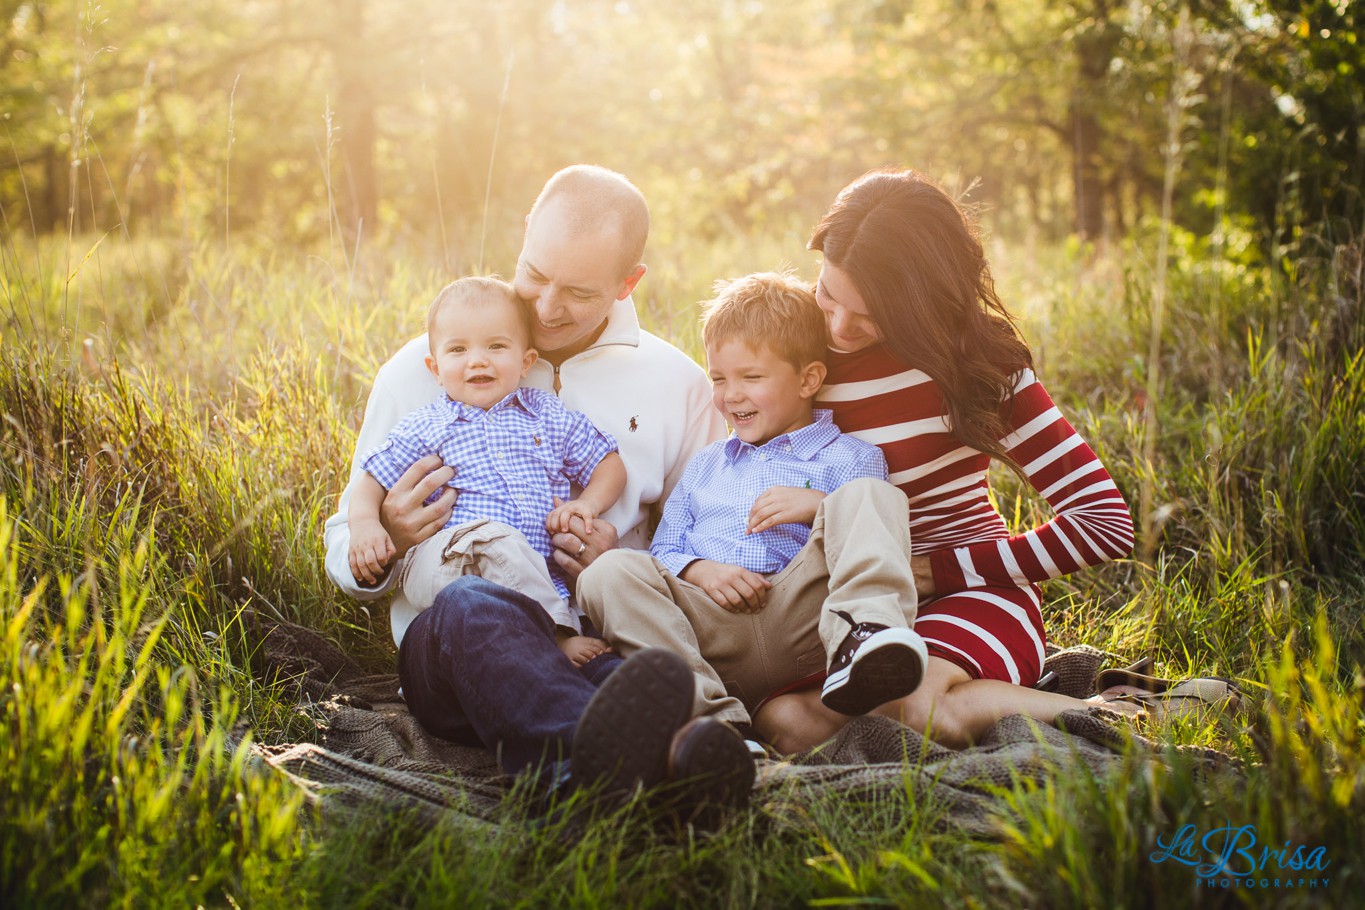 Things to Know Before Your Family Photos La Brisa Photography